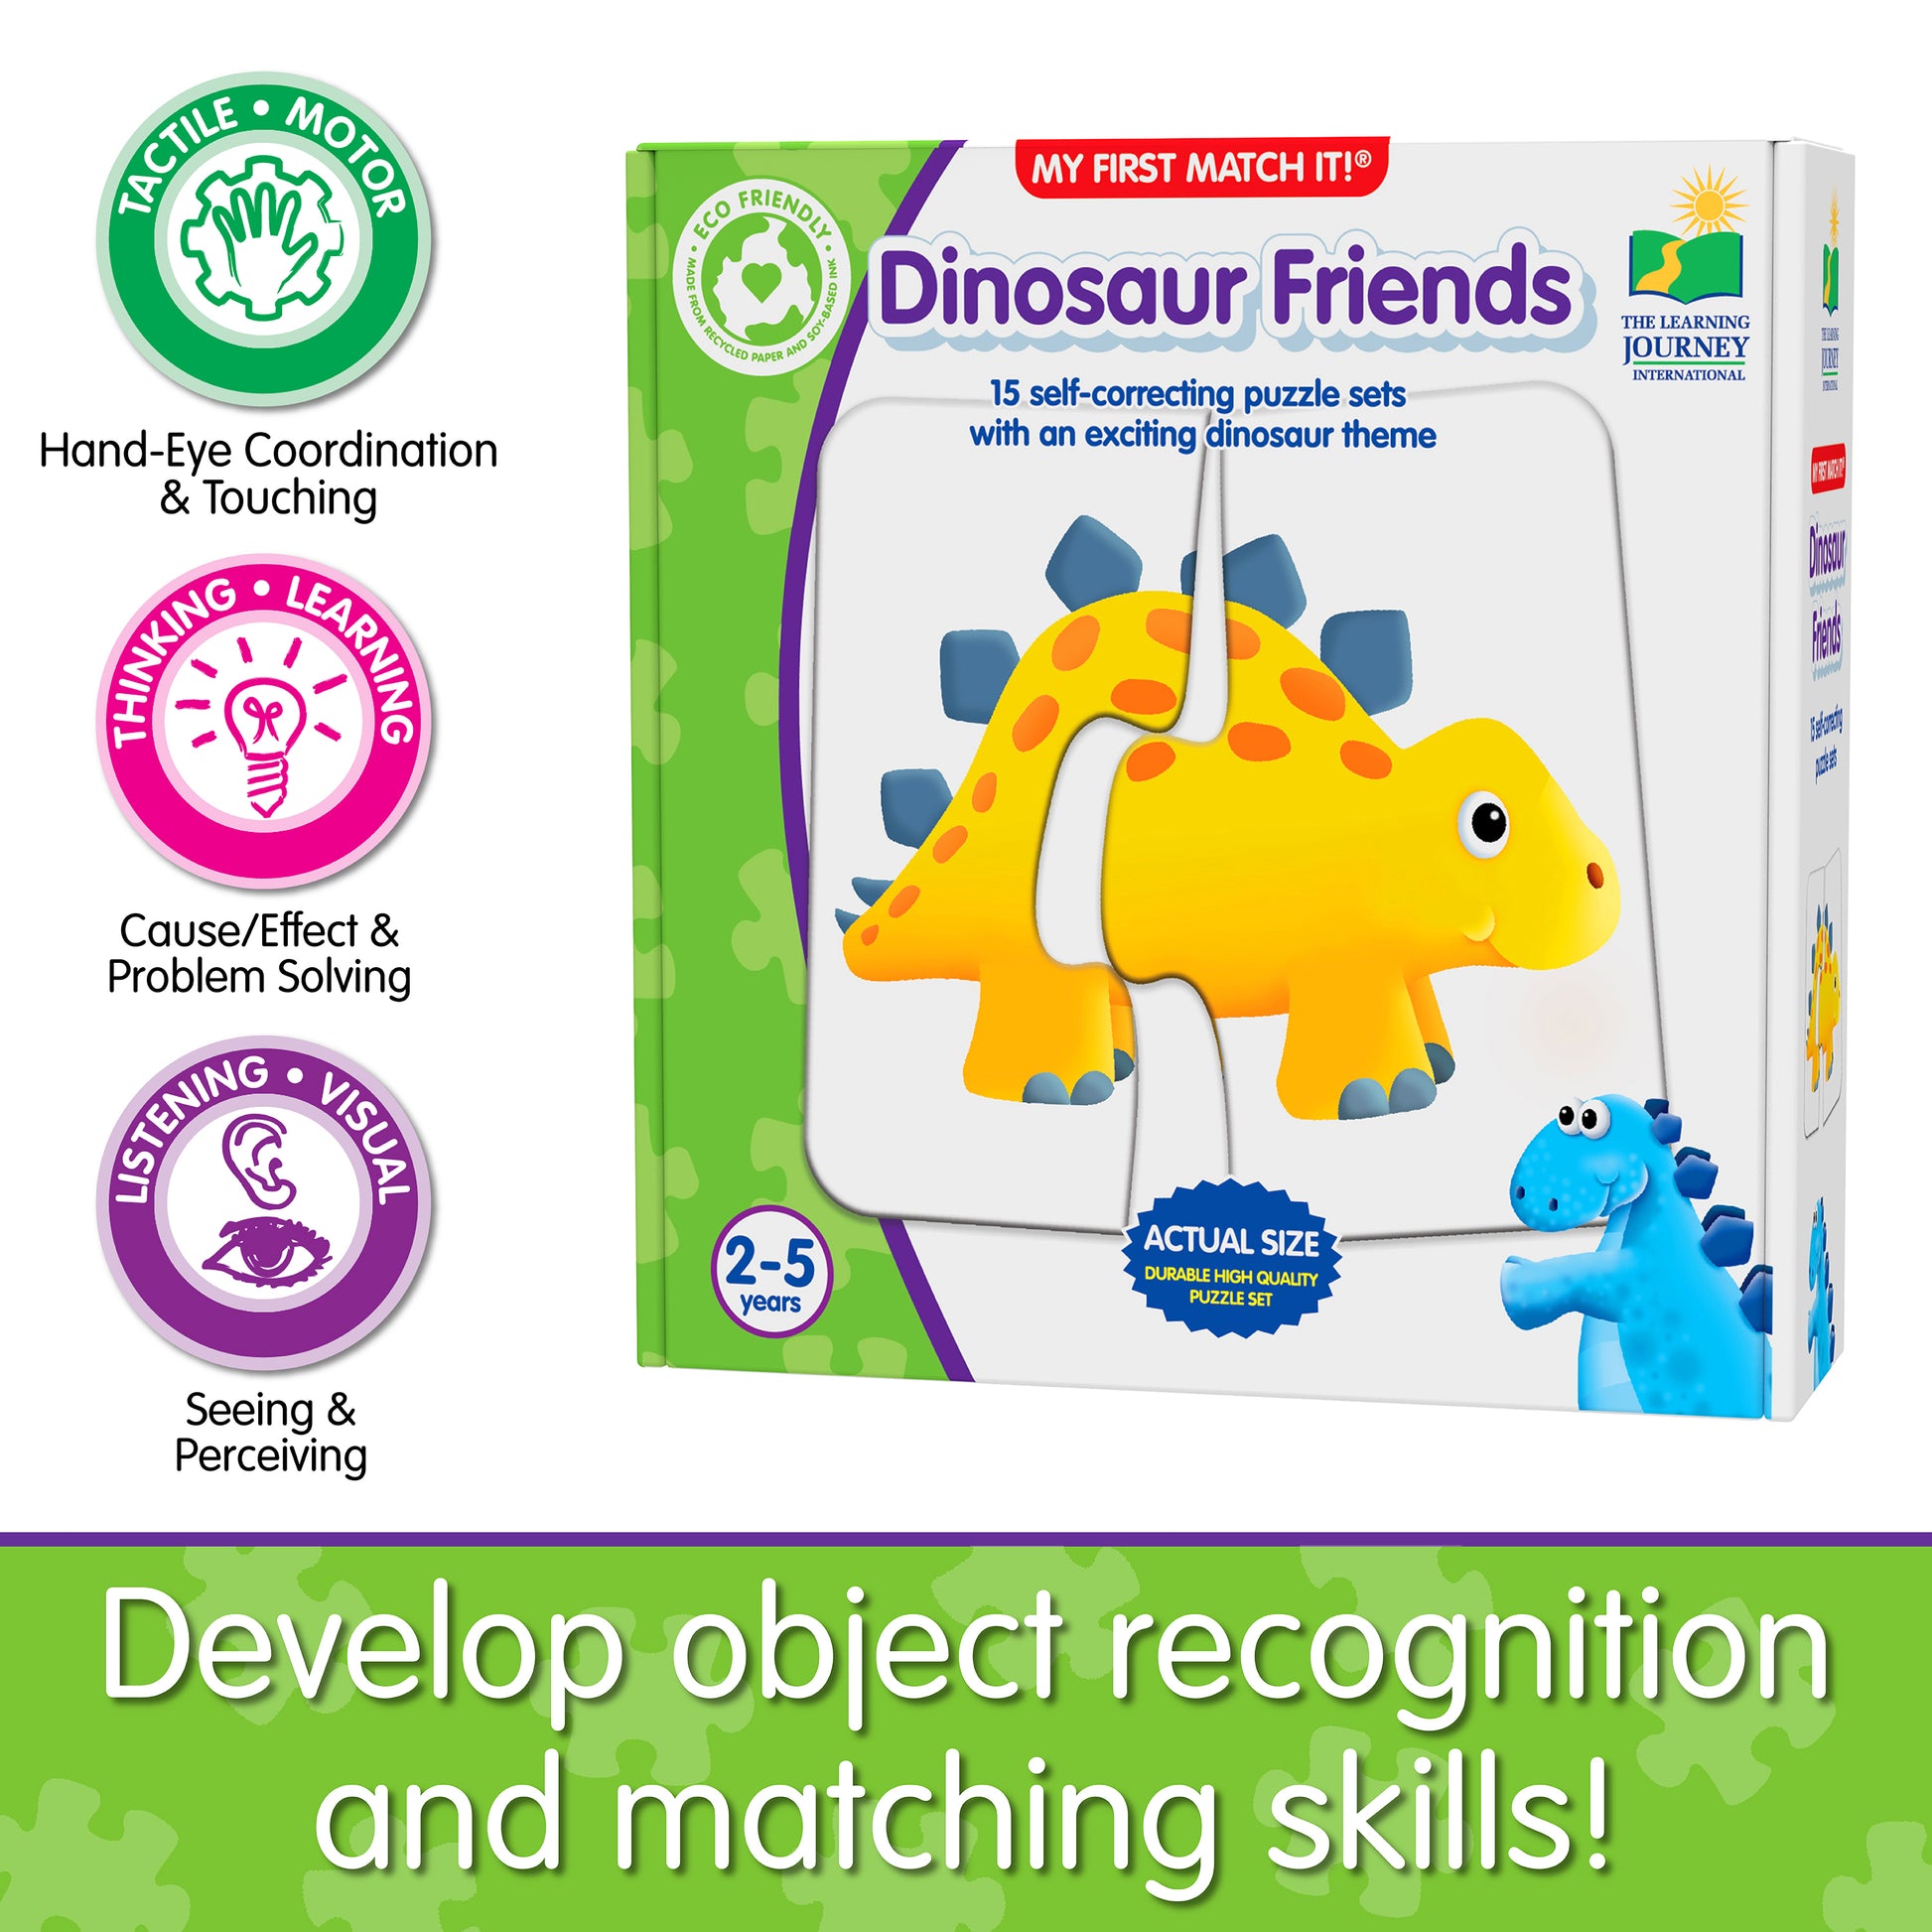 Infographic about My First Match It - Dinosaur Friends' educational benefits that says, "Develop object recognition and matching skills!"